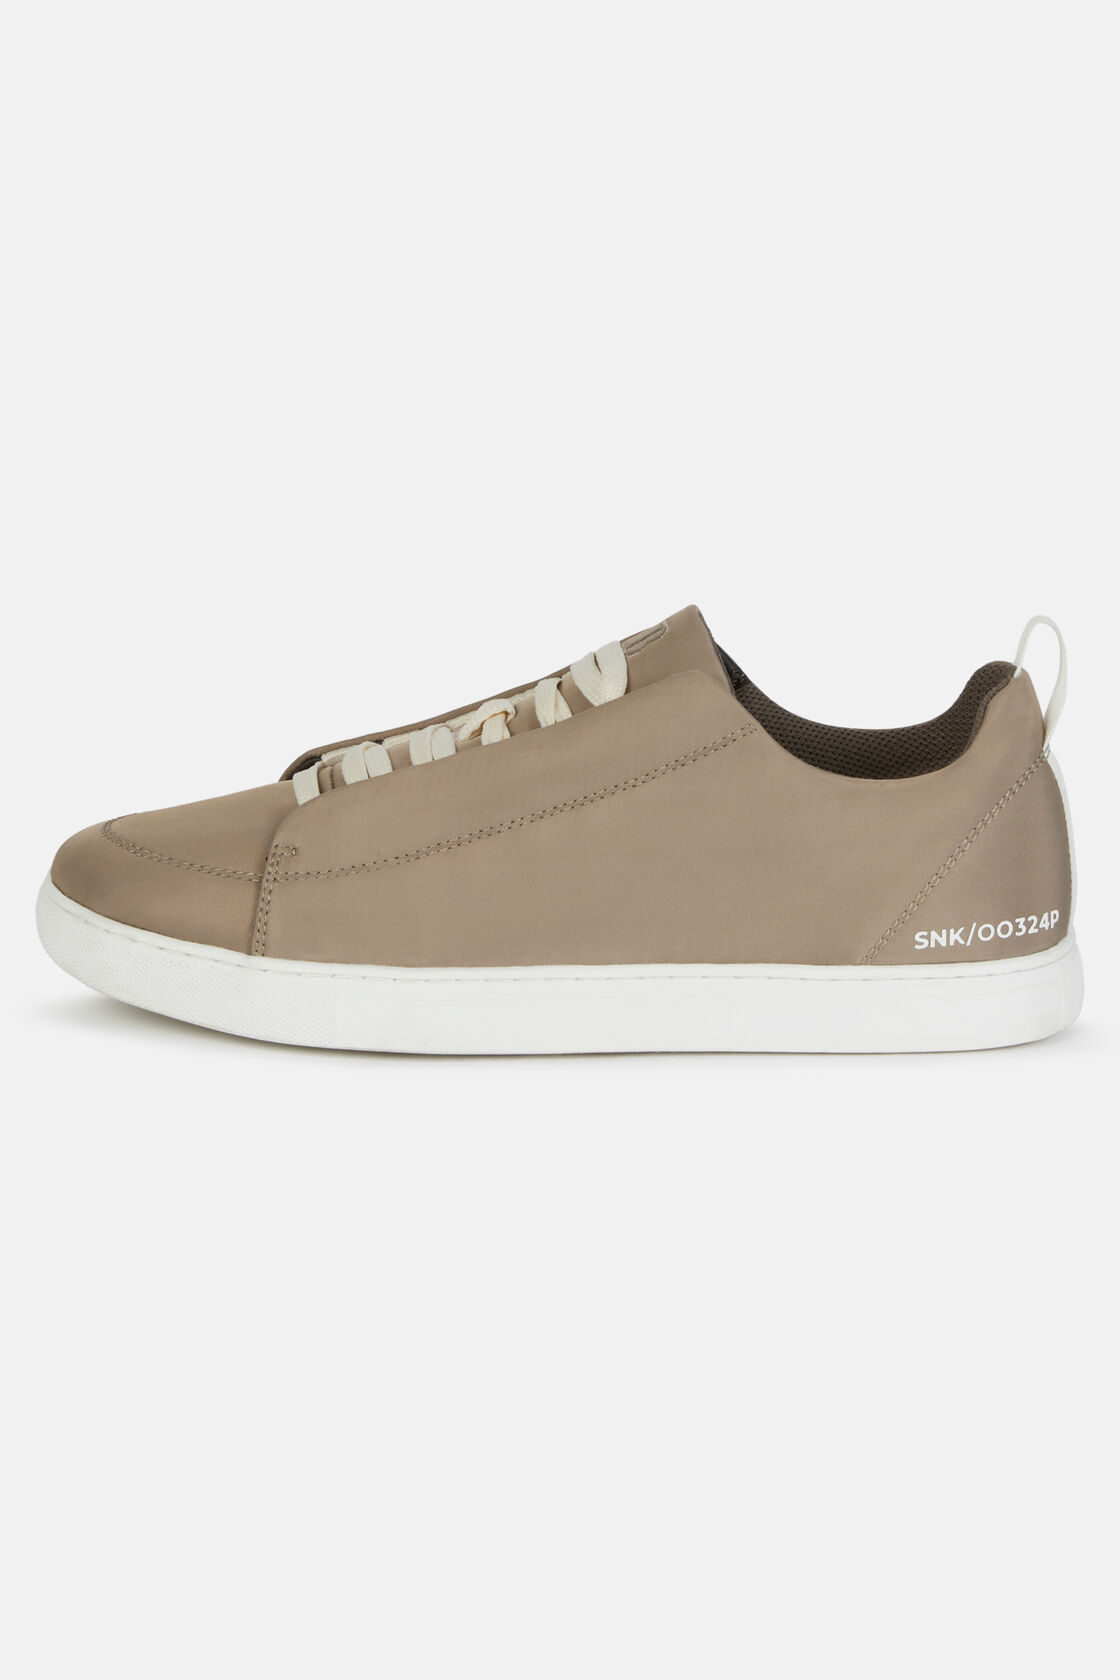 Trainers in Taupe Coloured Technical Fabric, Taupe, hi-res